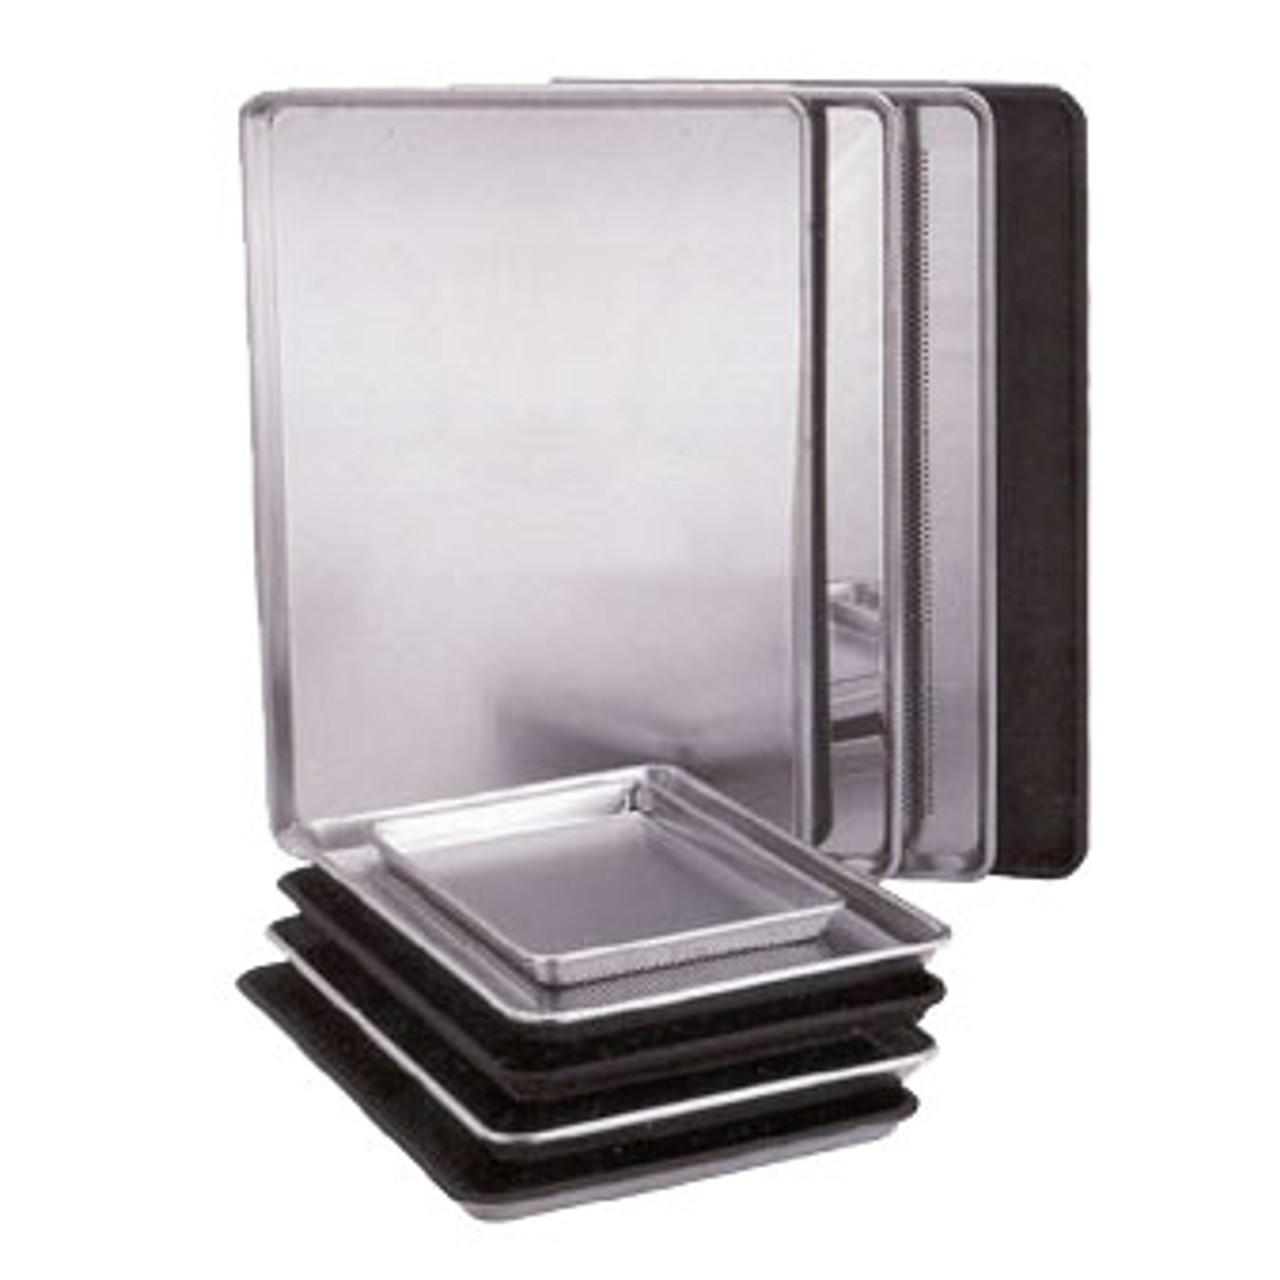 Vollrath 9003 Wear-Ever Full Size Sheet Pan - Ford Hotel Supply